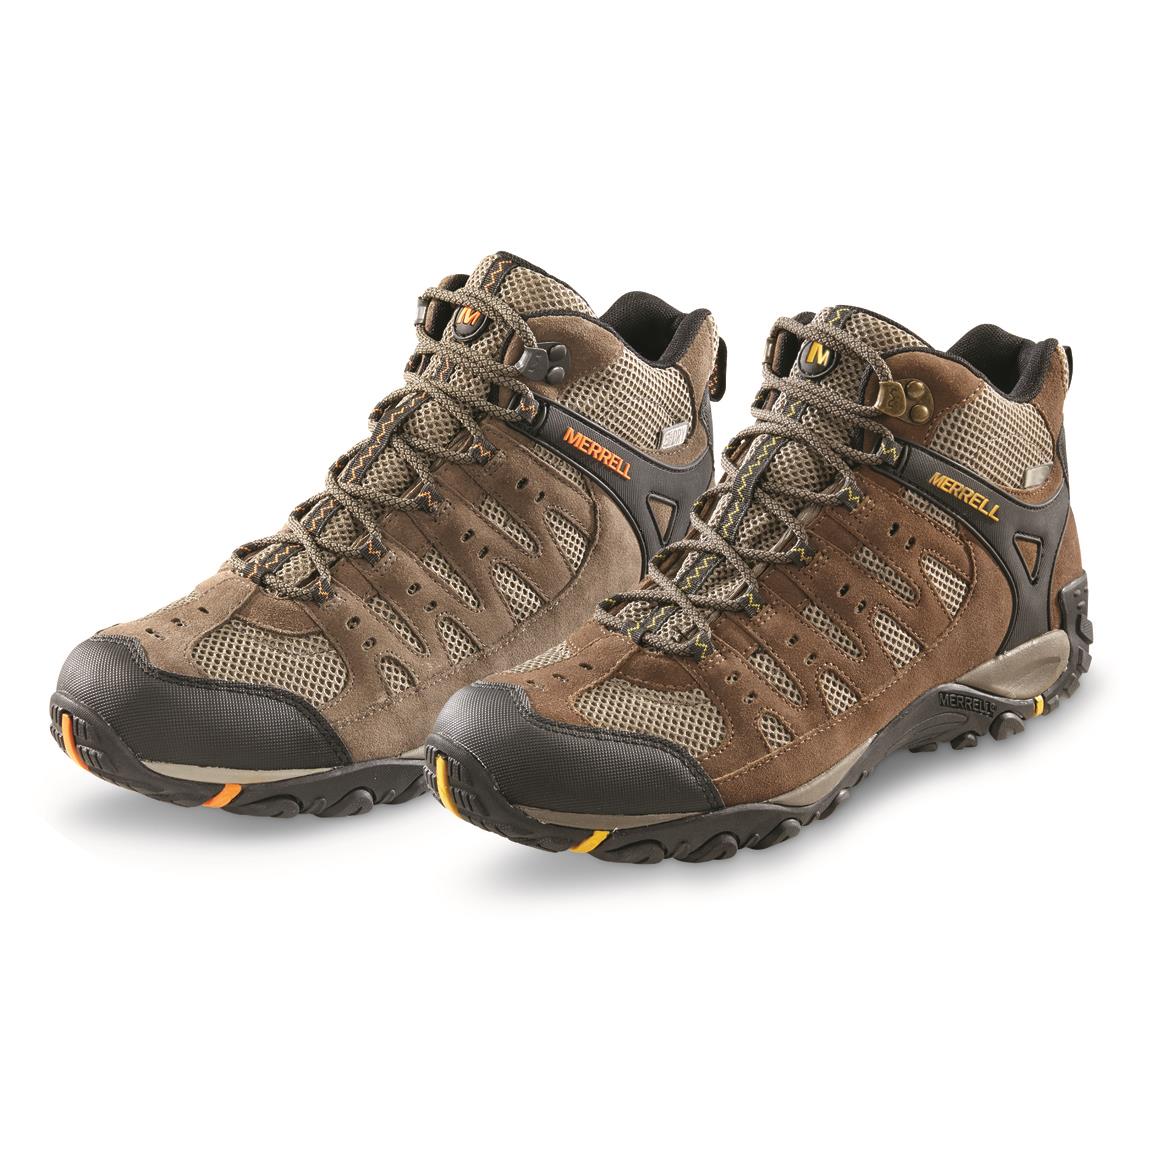 Accentor Mid Waterproof Hiking Boots 